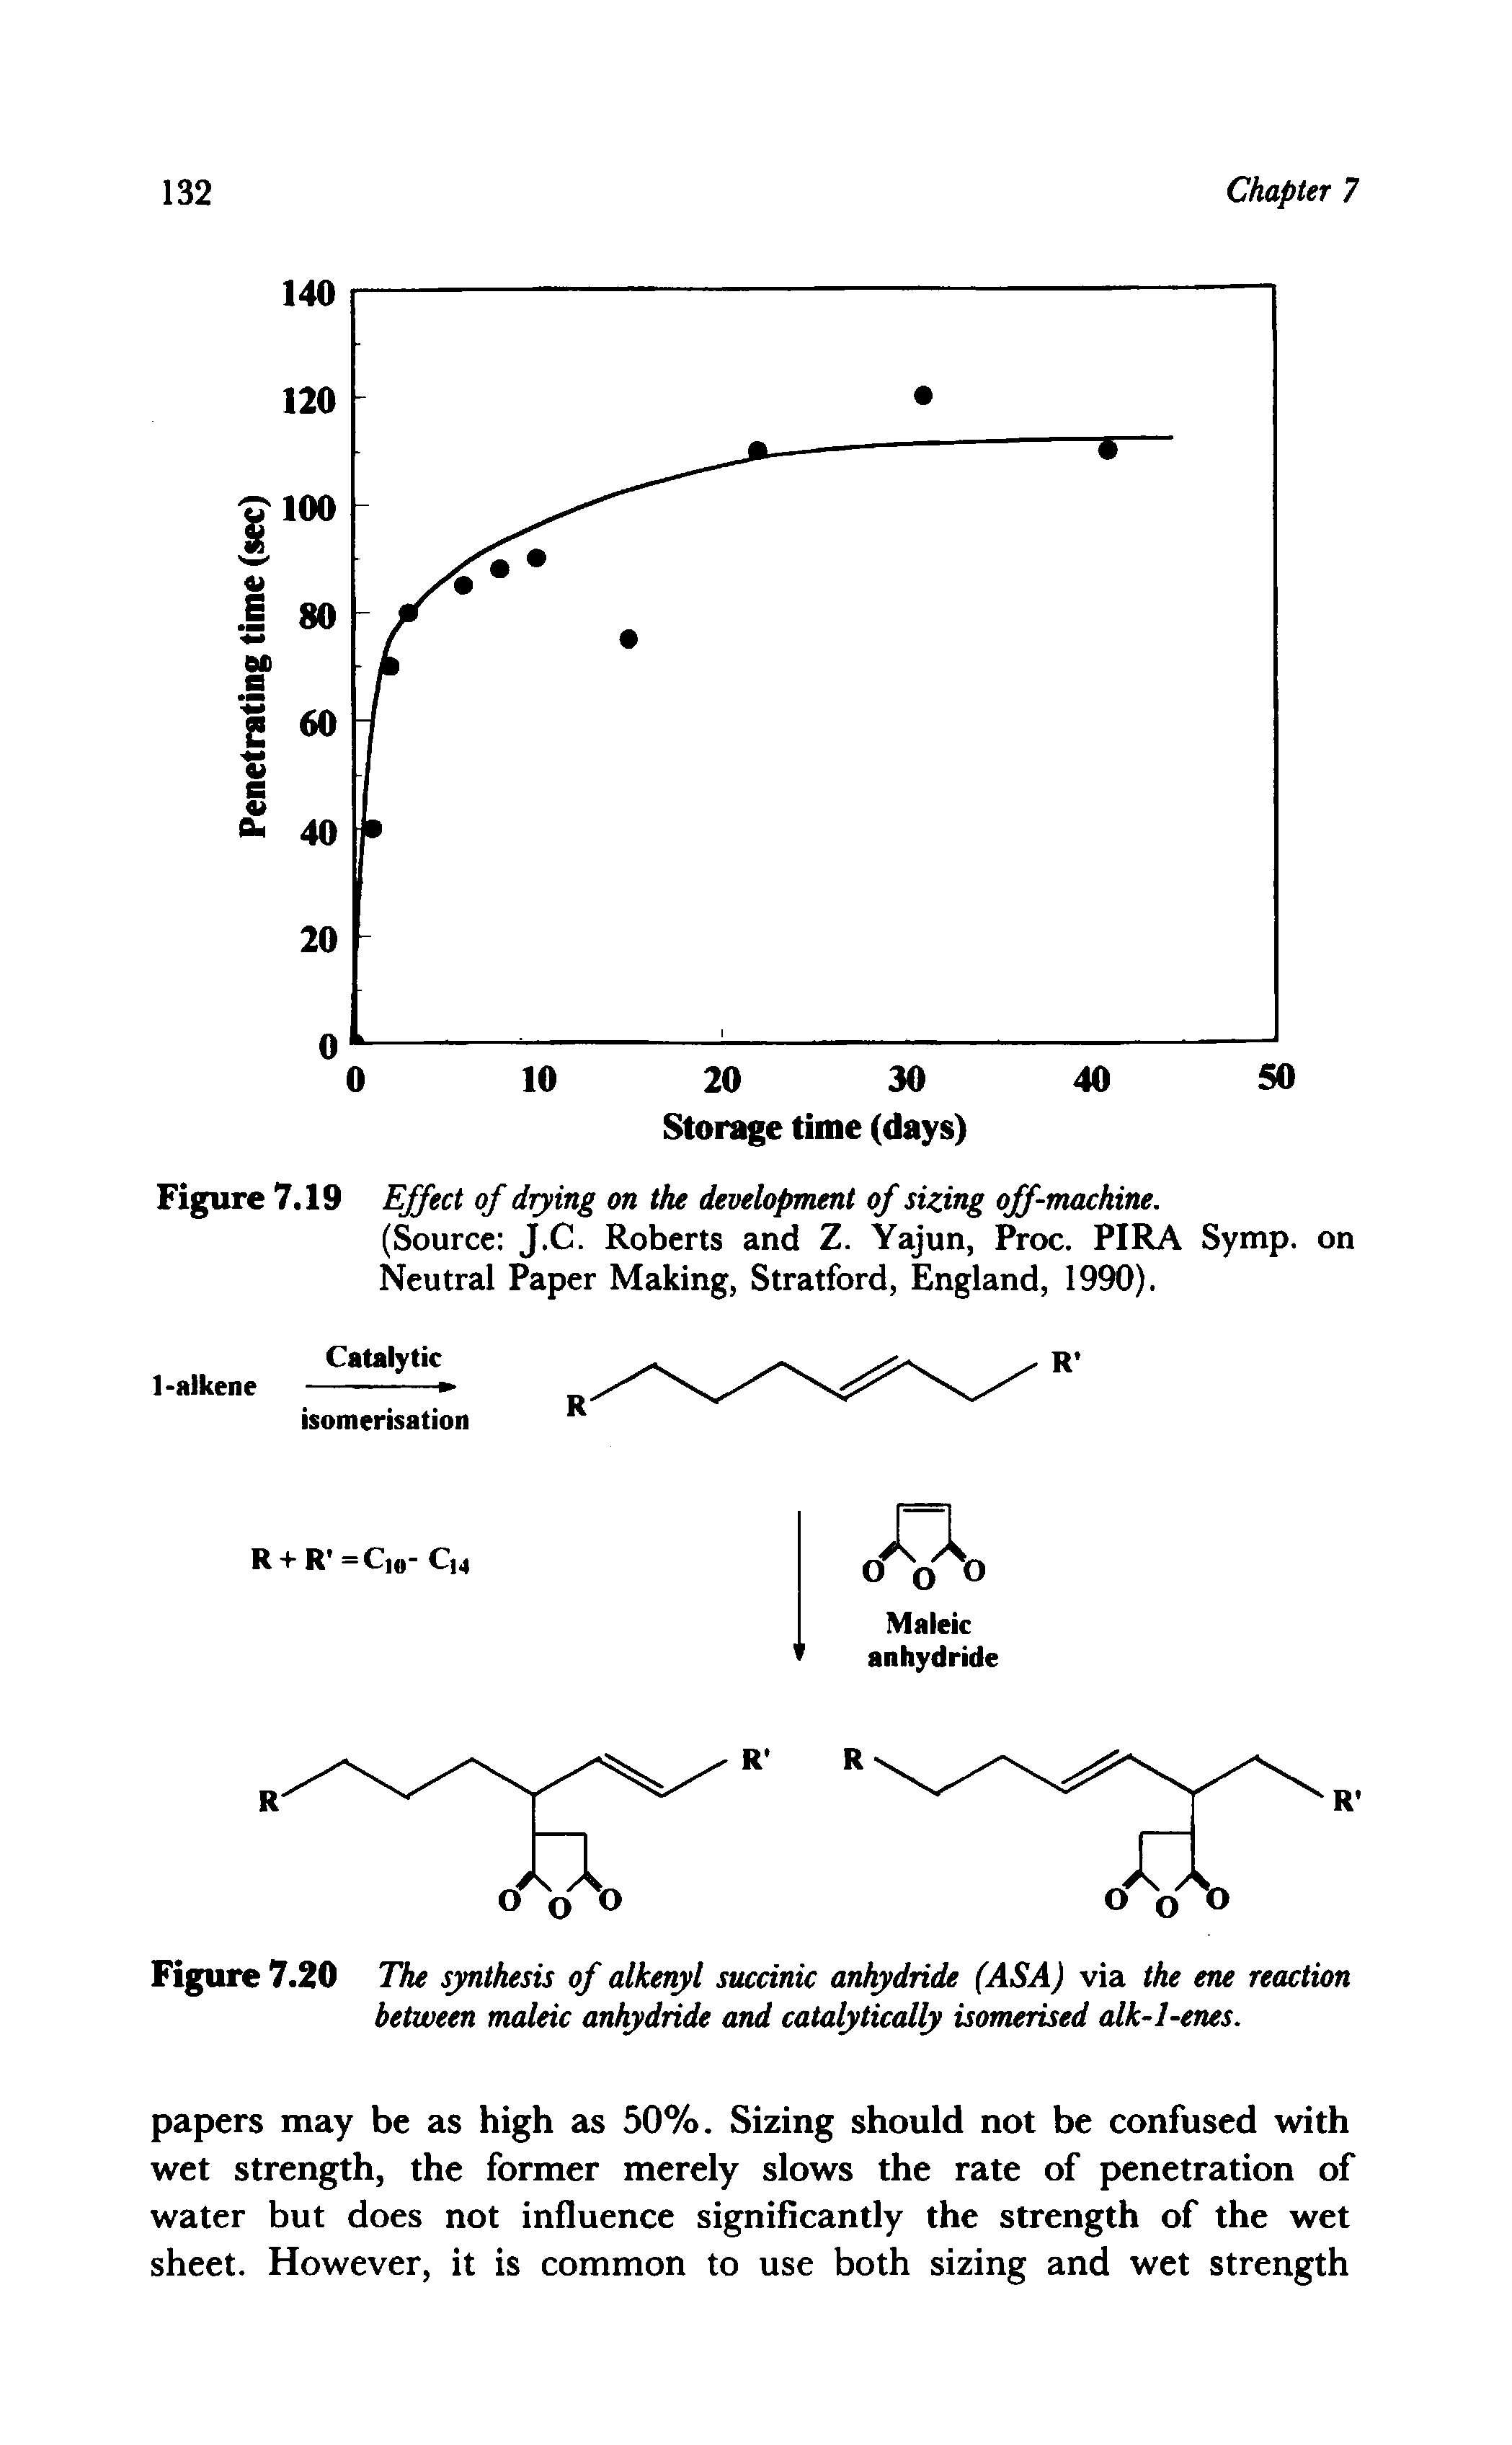 Figure 7.20 The synthesis of alkenyl succinic anhydride (ASA) via the ene reaction between maleic anhydride and catalytically isomerised alk-l-enes.